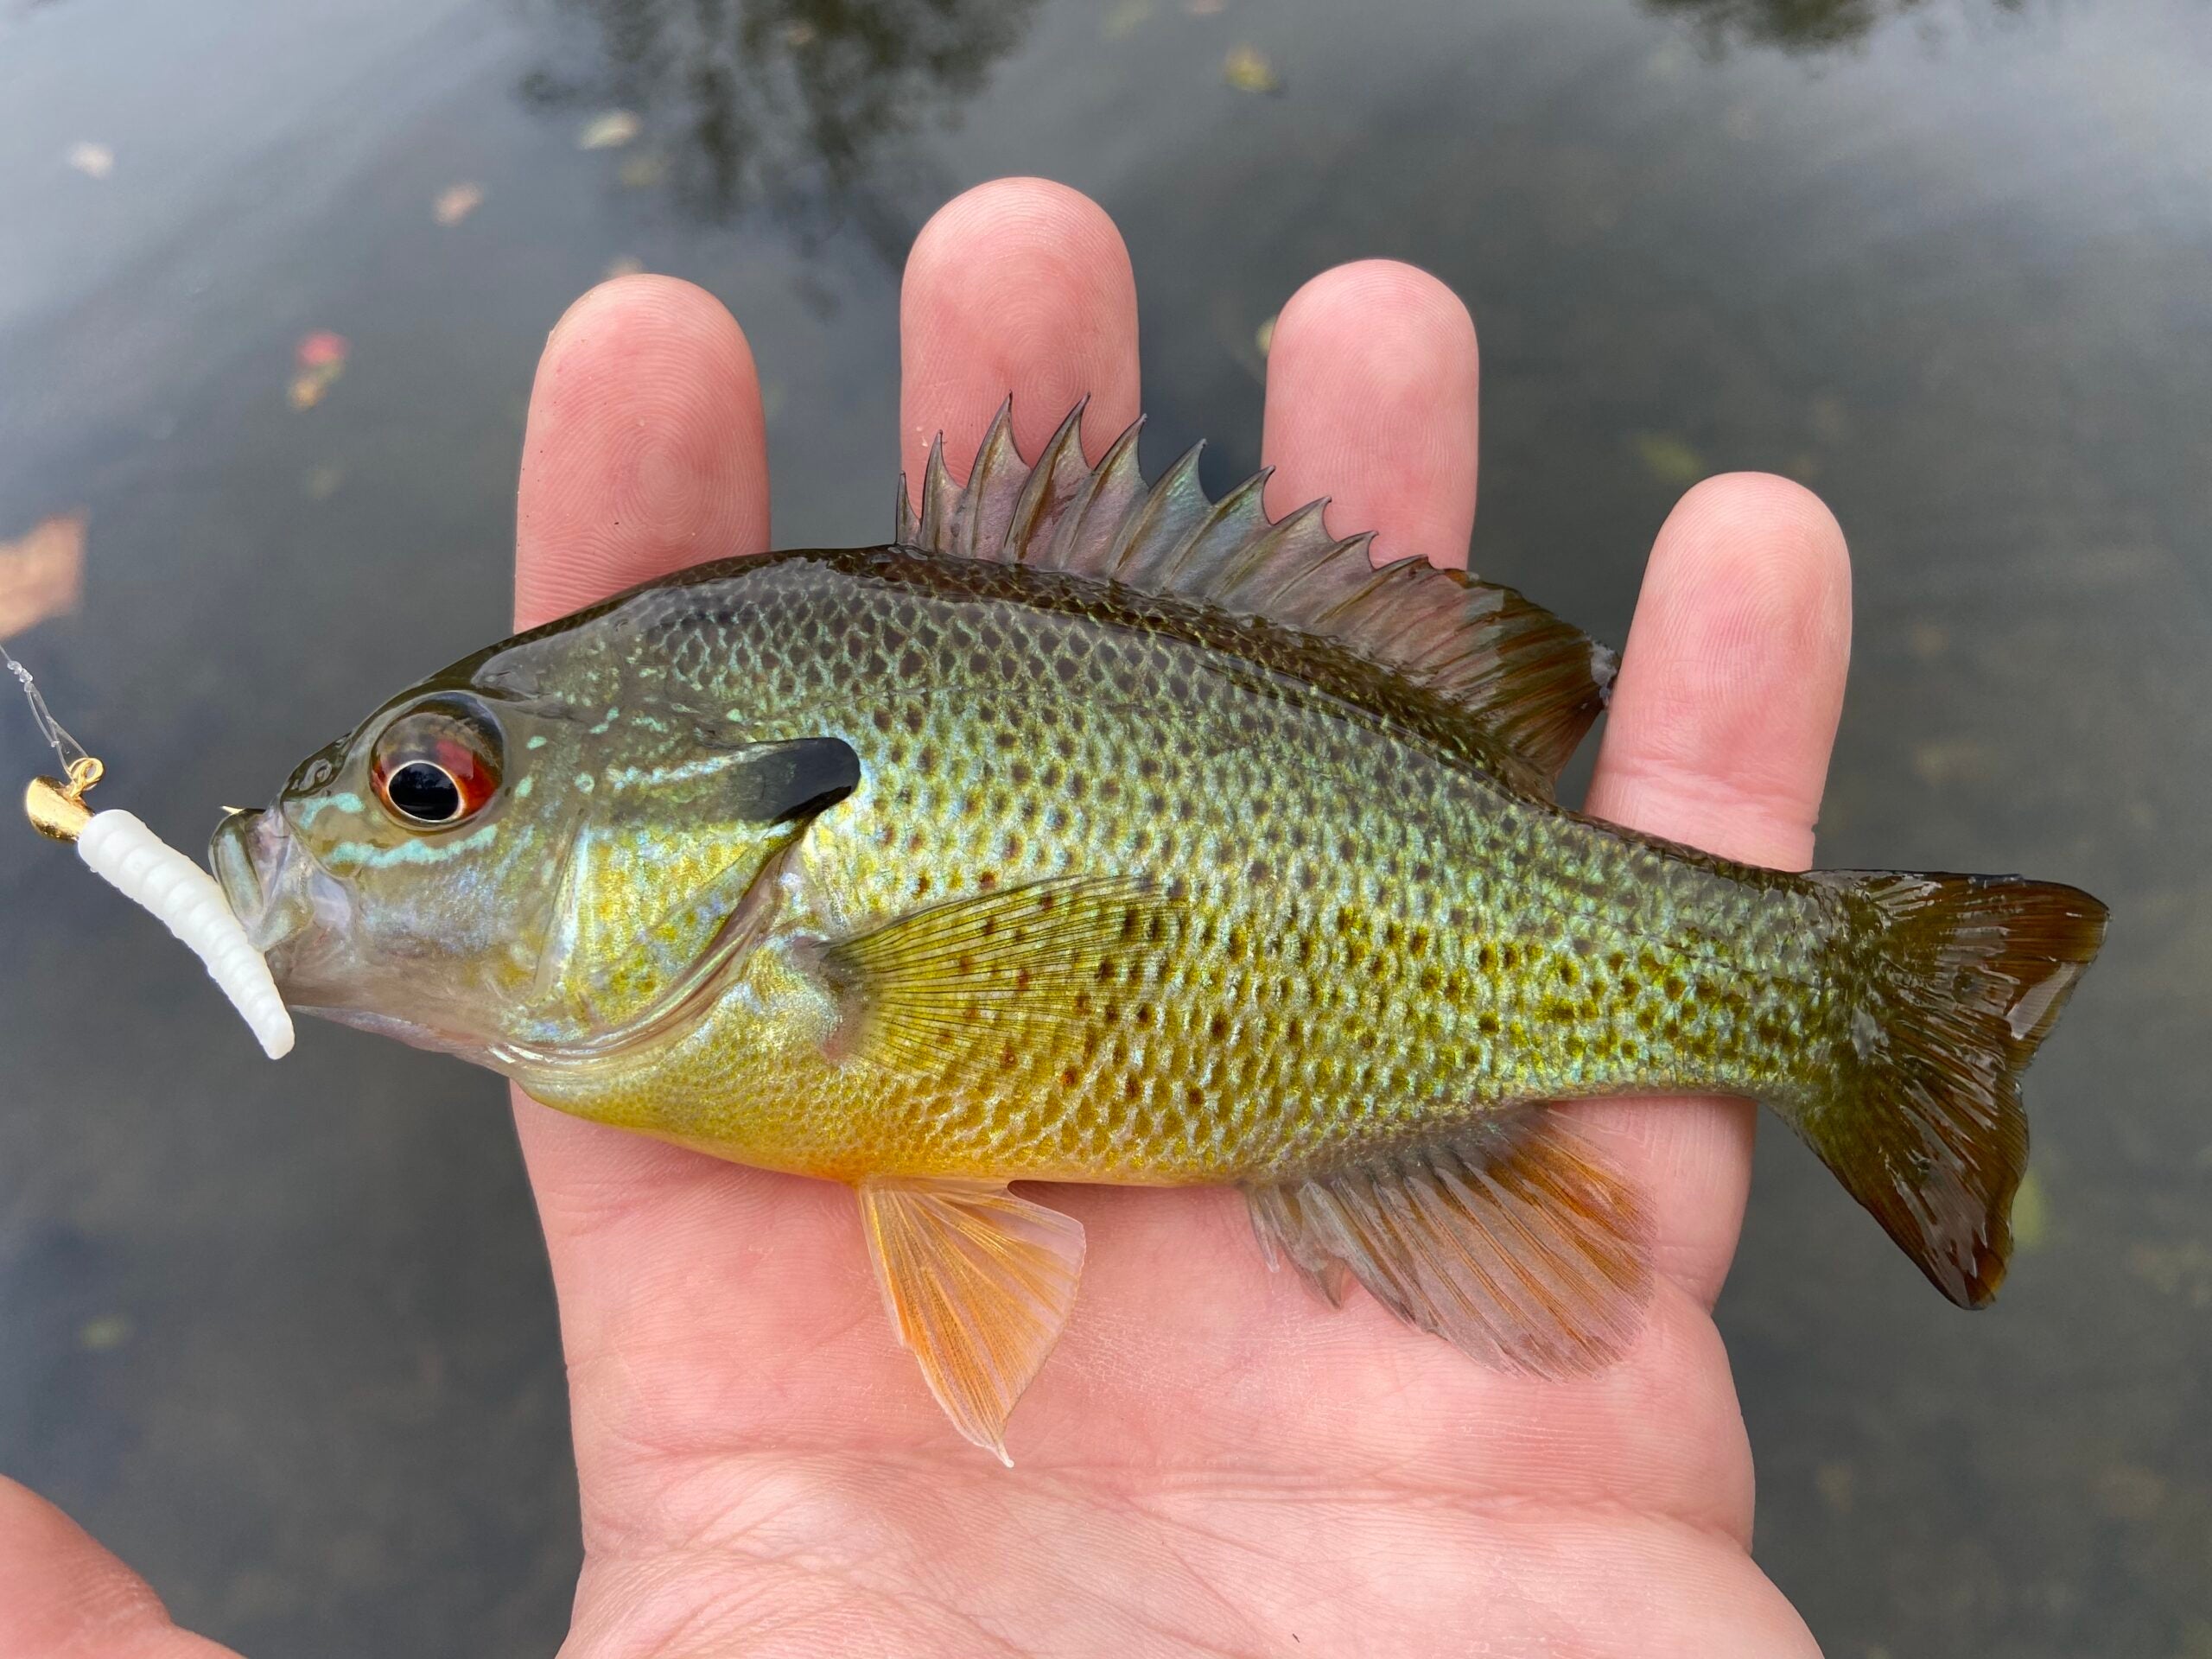 Fisherman holds a green sunfish that ate a jig